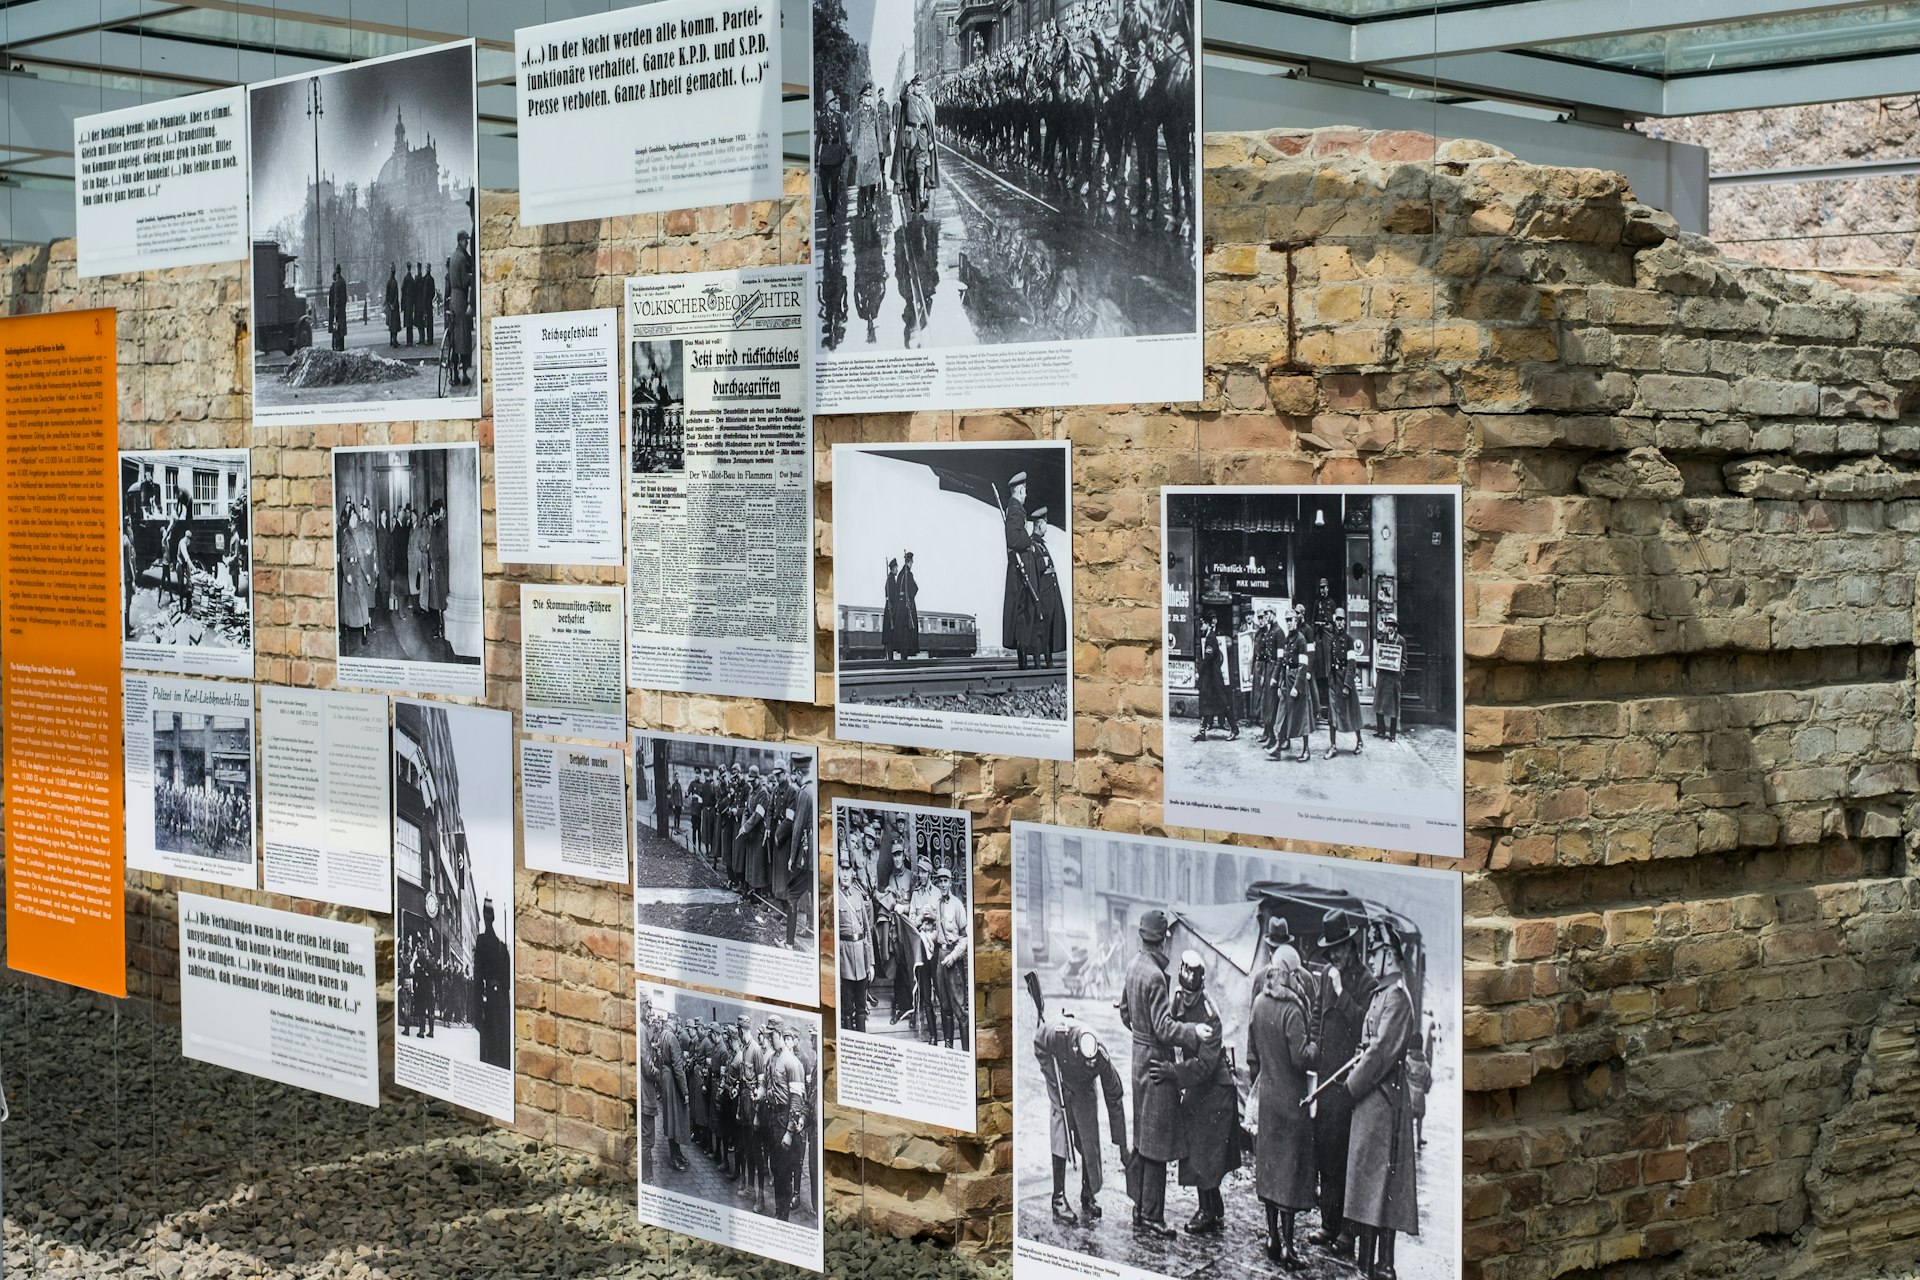 Pictures from the second world war at the Topography of Terror 